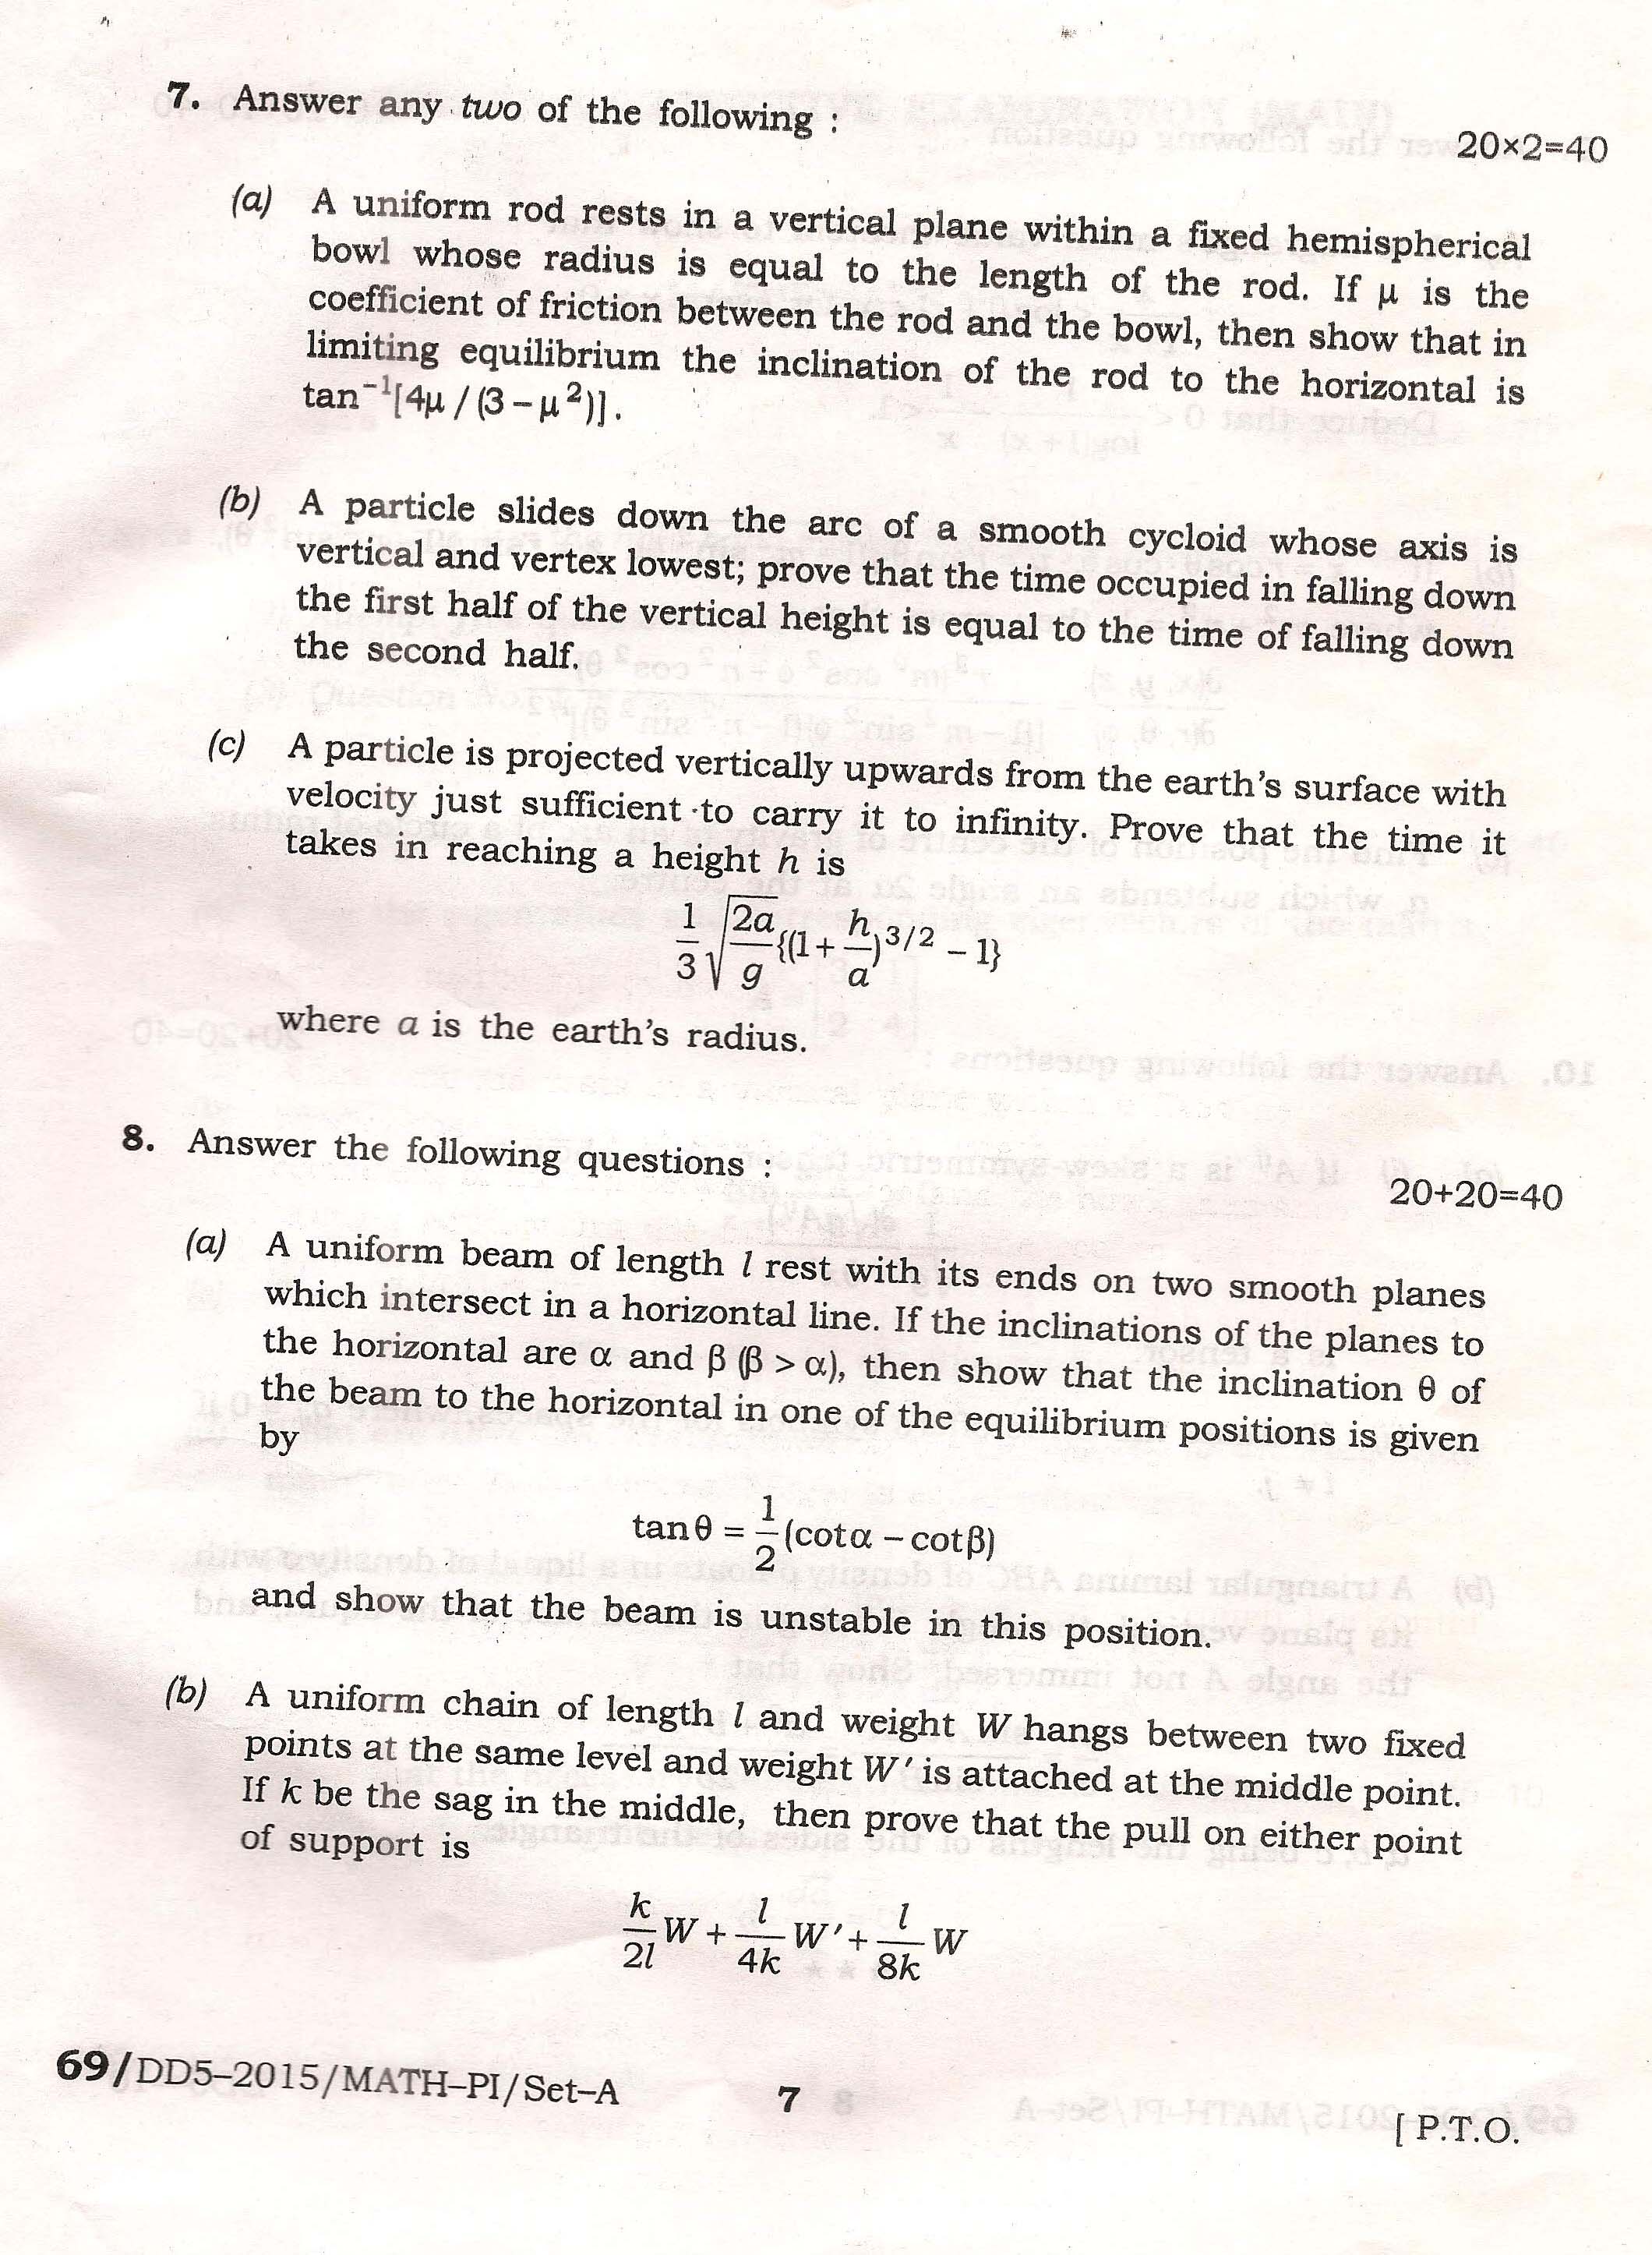 APPSC Combined Competitive Main Exam 2015 Mathematics Paper I 7